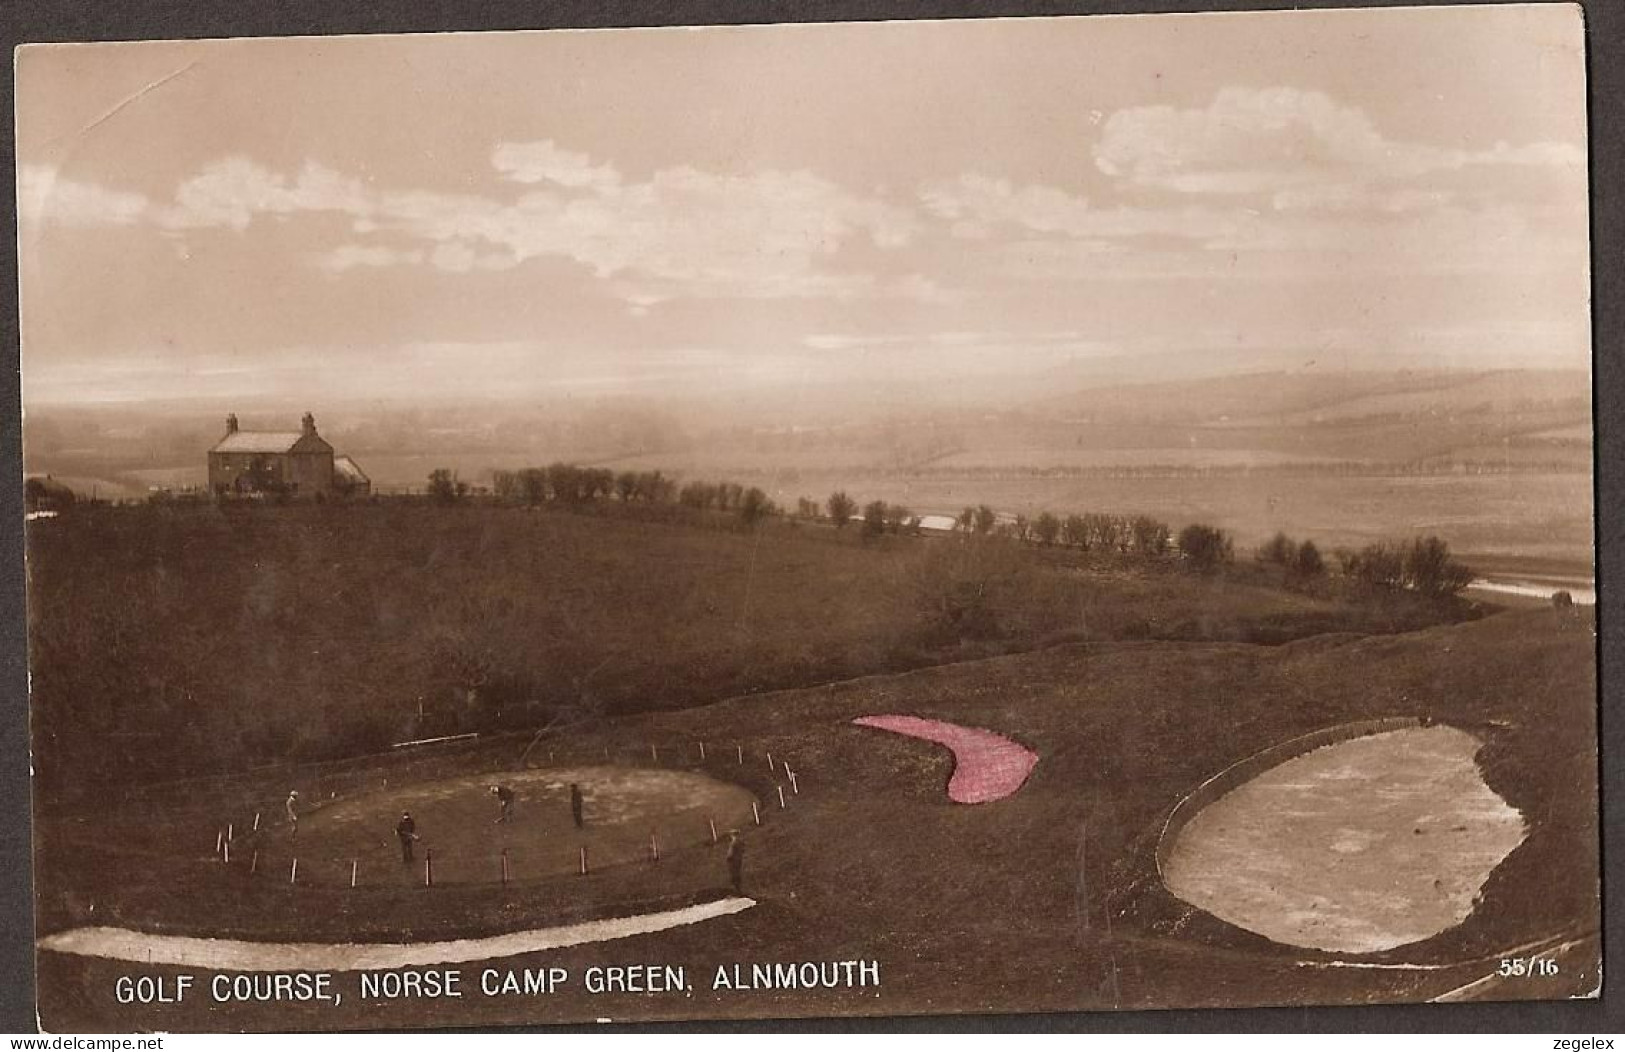 Alnmouth - Golf Course, Norse Camp Green - Other